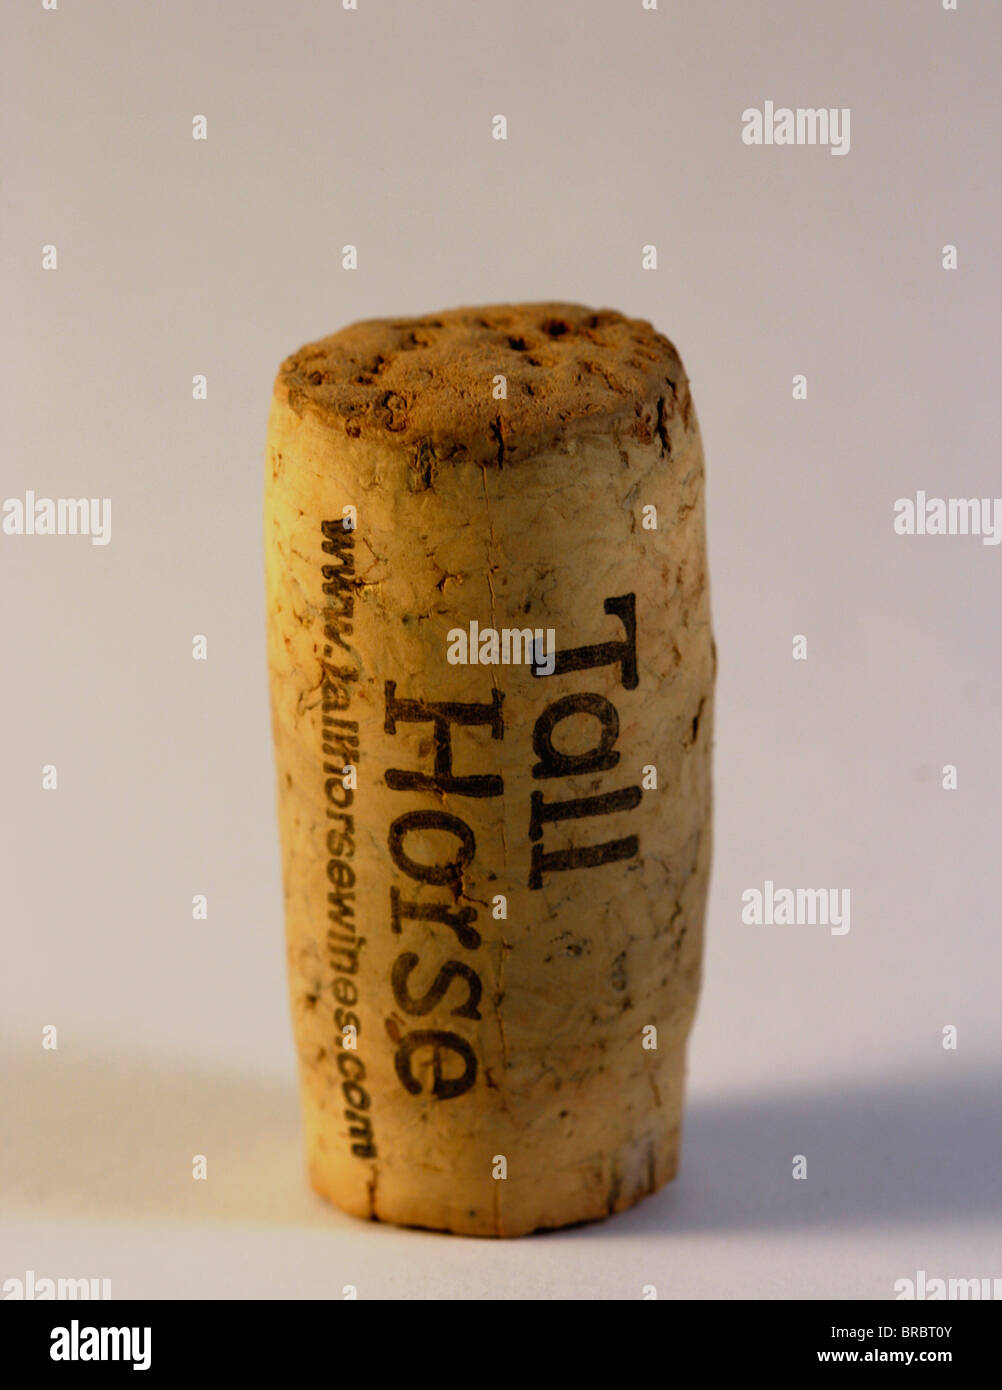 Wine cork from a bottle of South African red wine, Tall Horse Stock Photo